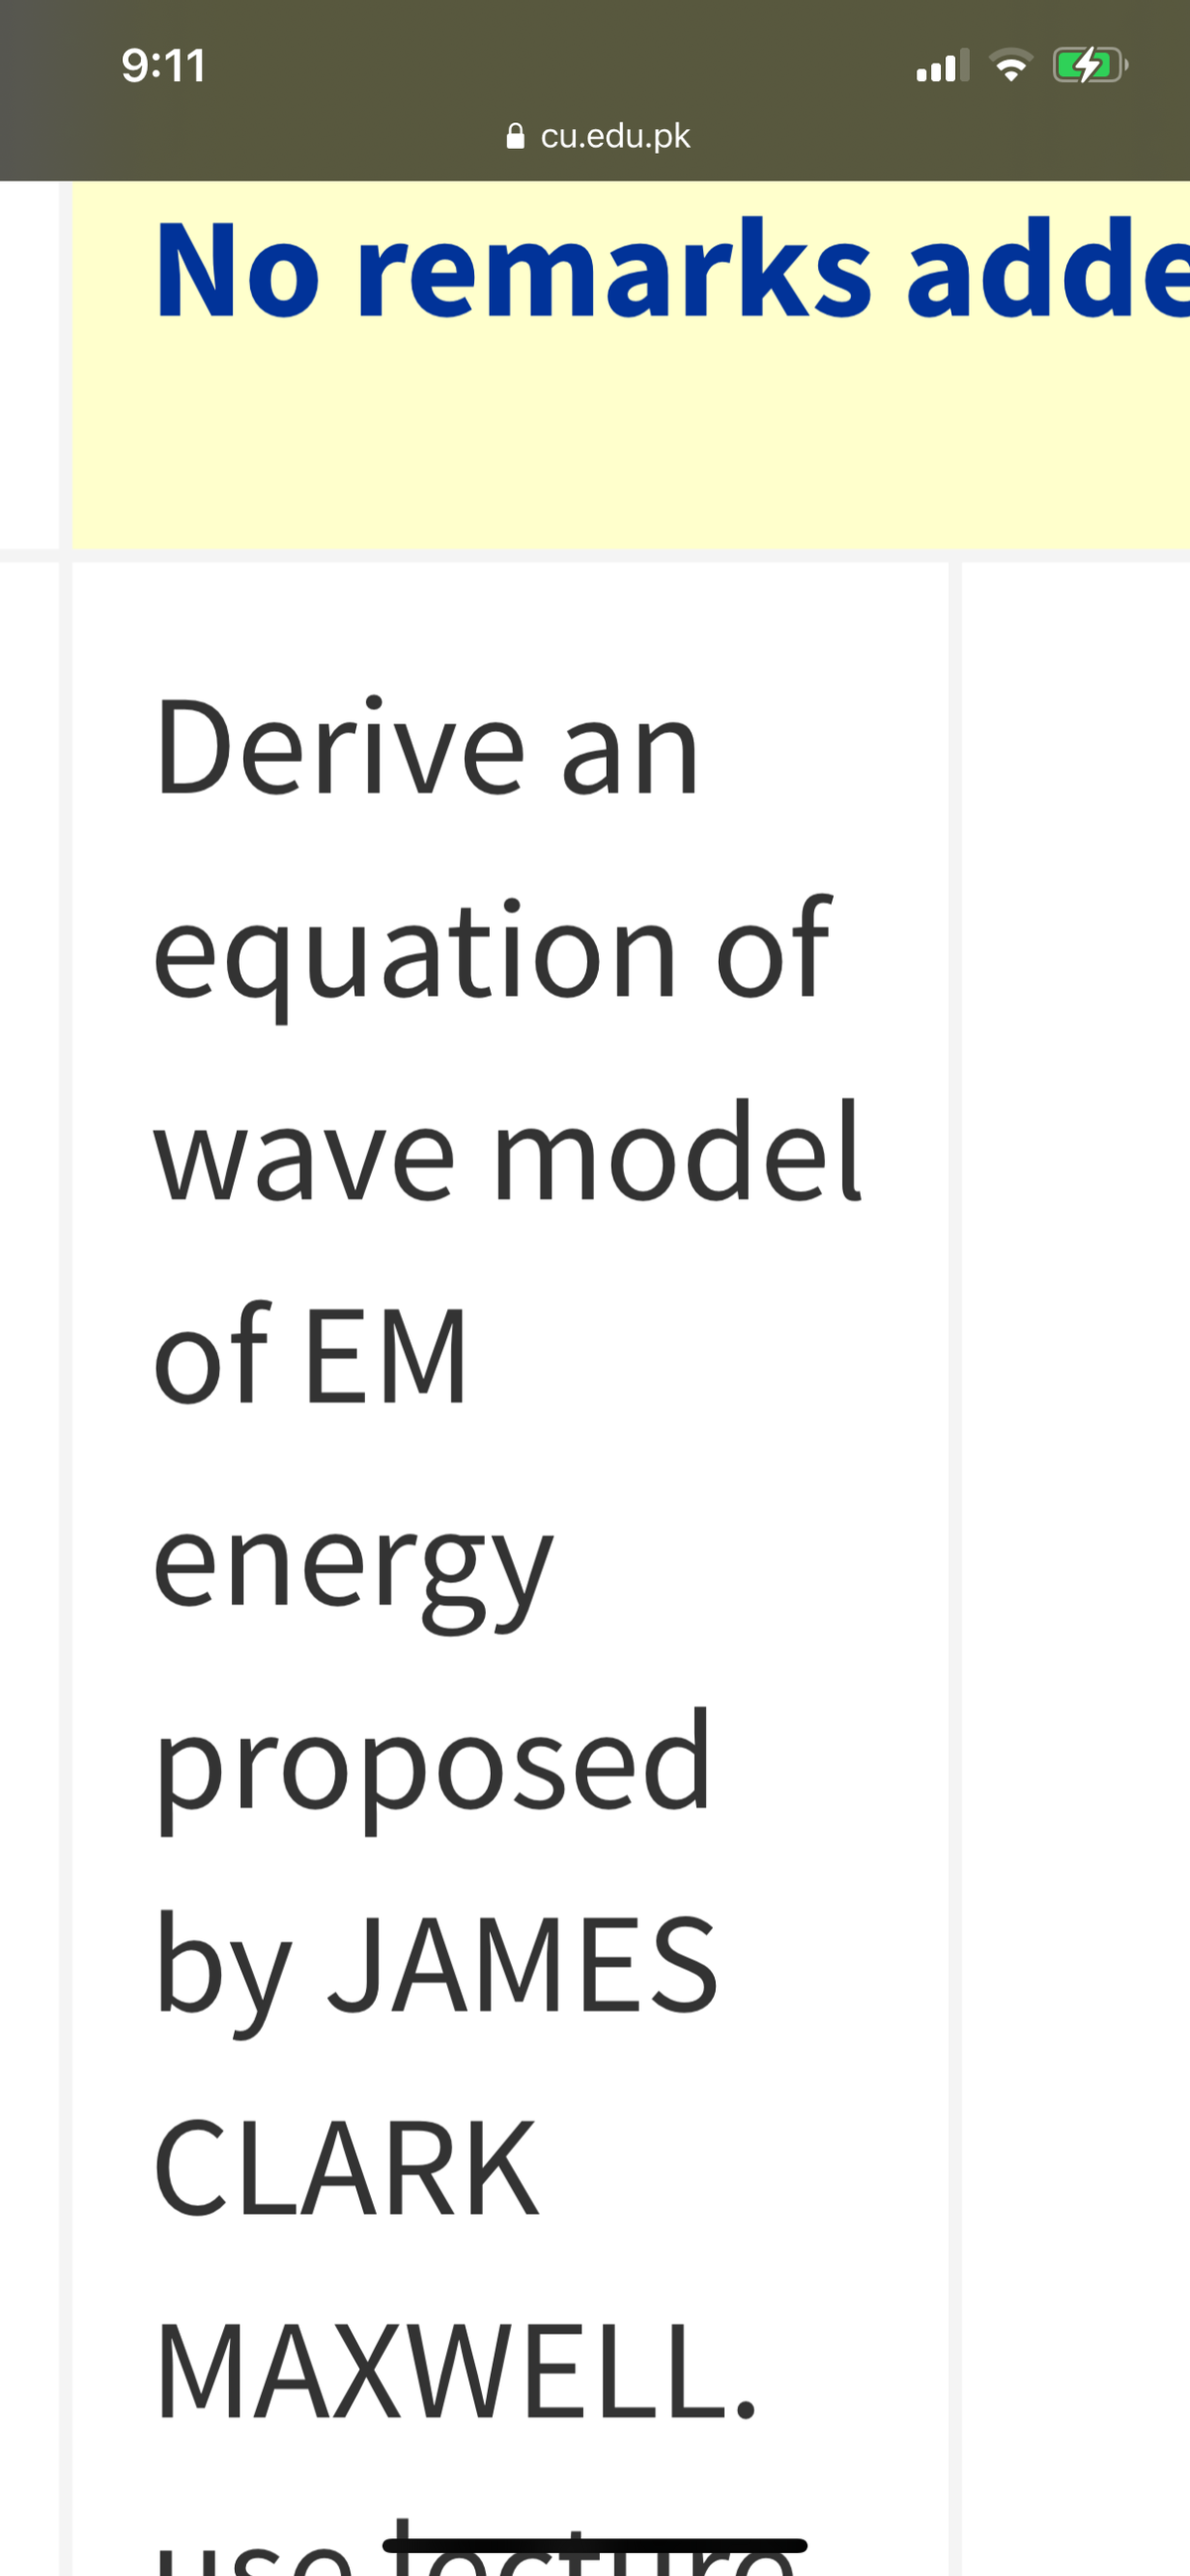 9:11
A cu.edu.pk
No remarks adde
Derive an
equation of
wave model
of EM
energy
proposed
by JAMES
CLARK
MAXWELL.
se to
